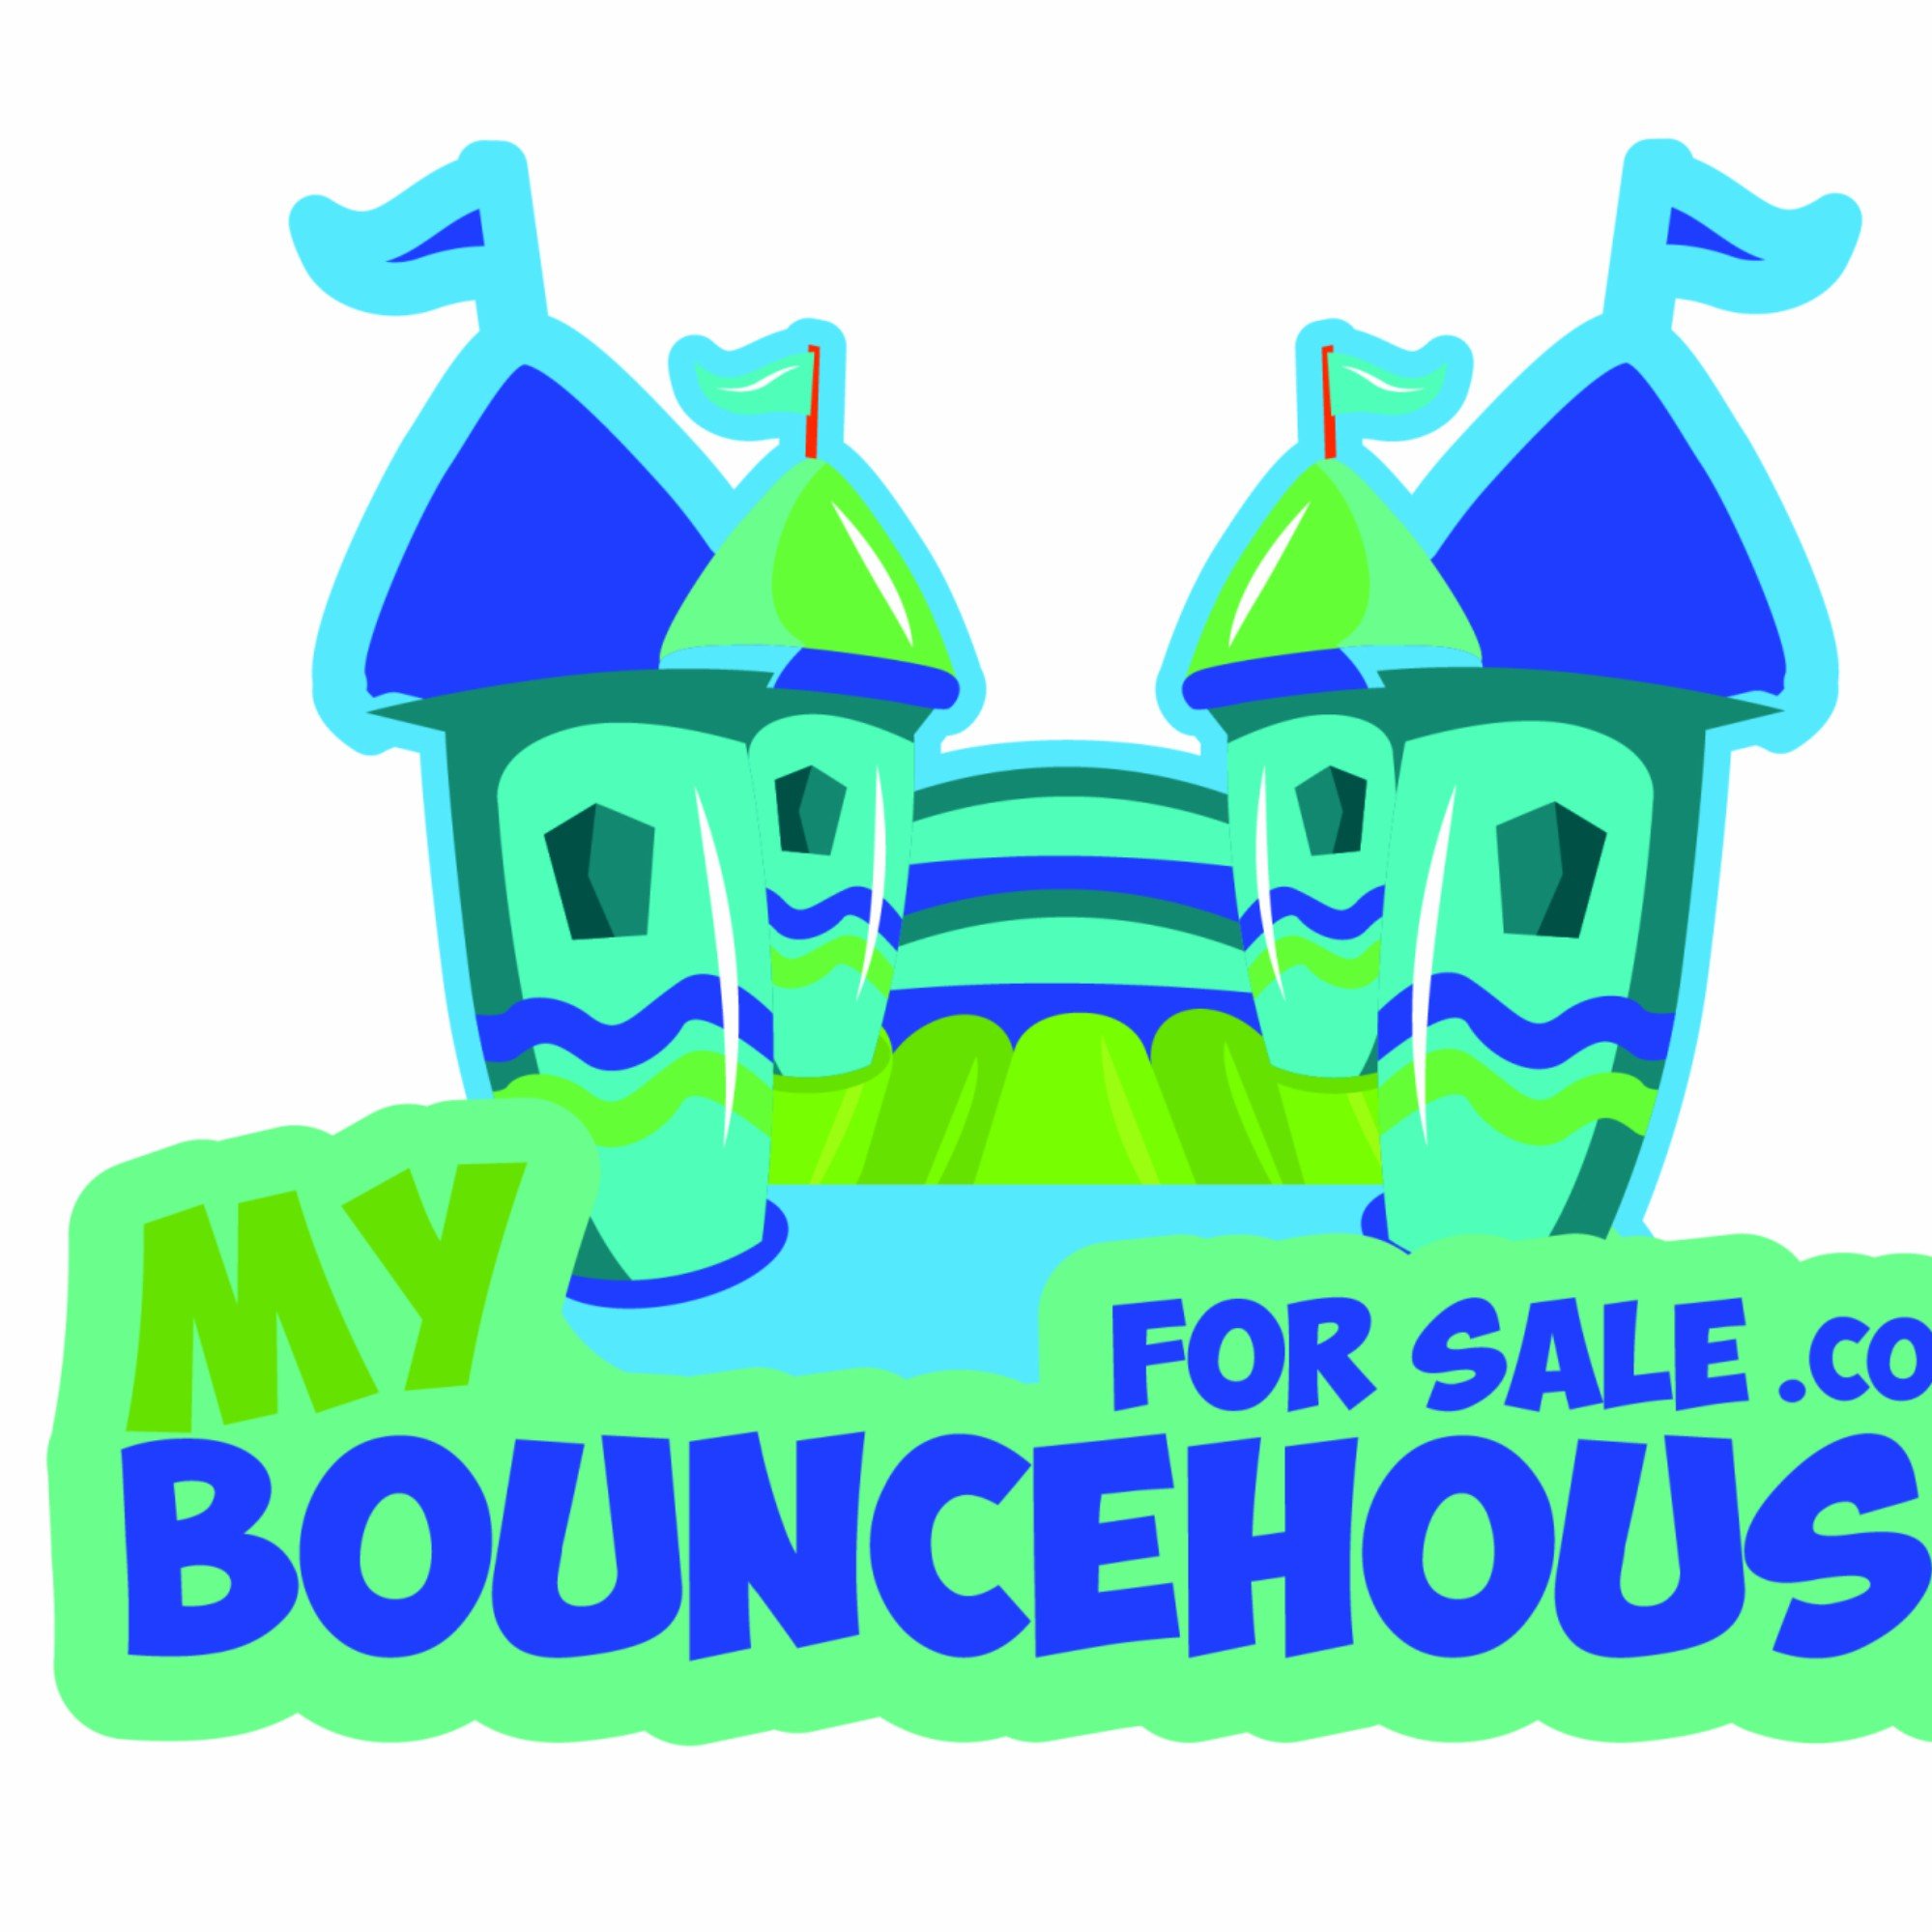 https://t.co/8AWTmvlksj is an online retailer and we provide the best prices online for Bounce Houses and Concessions.